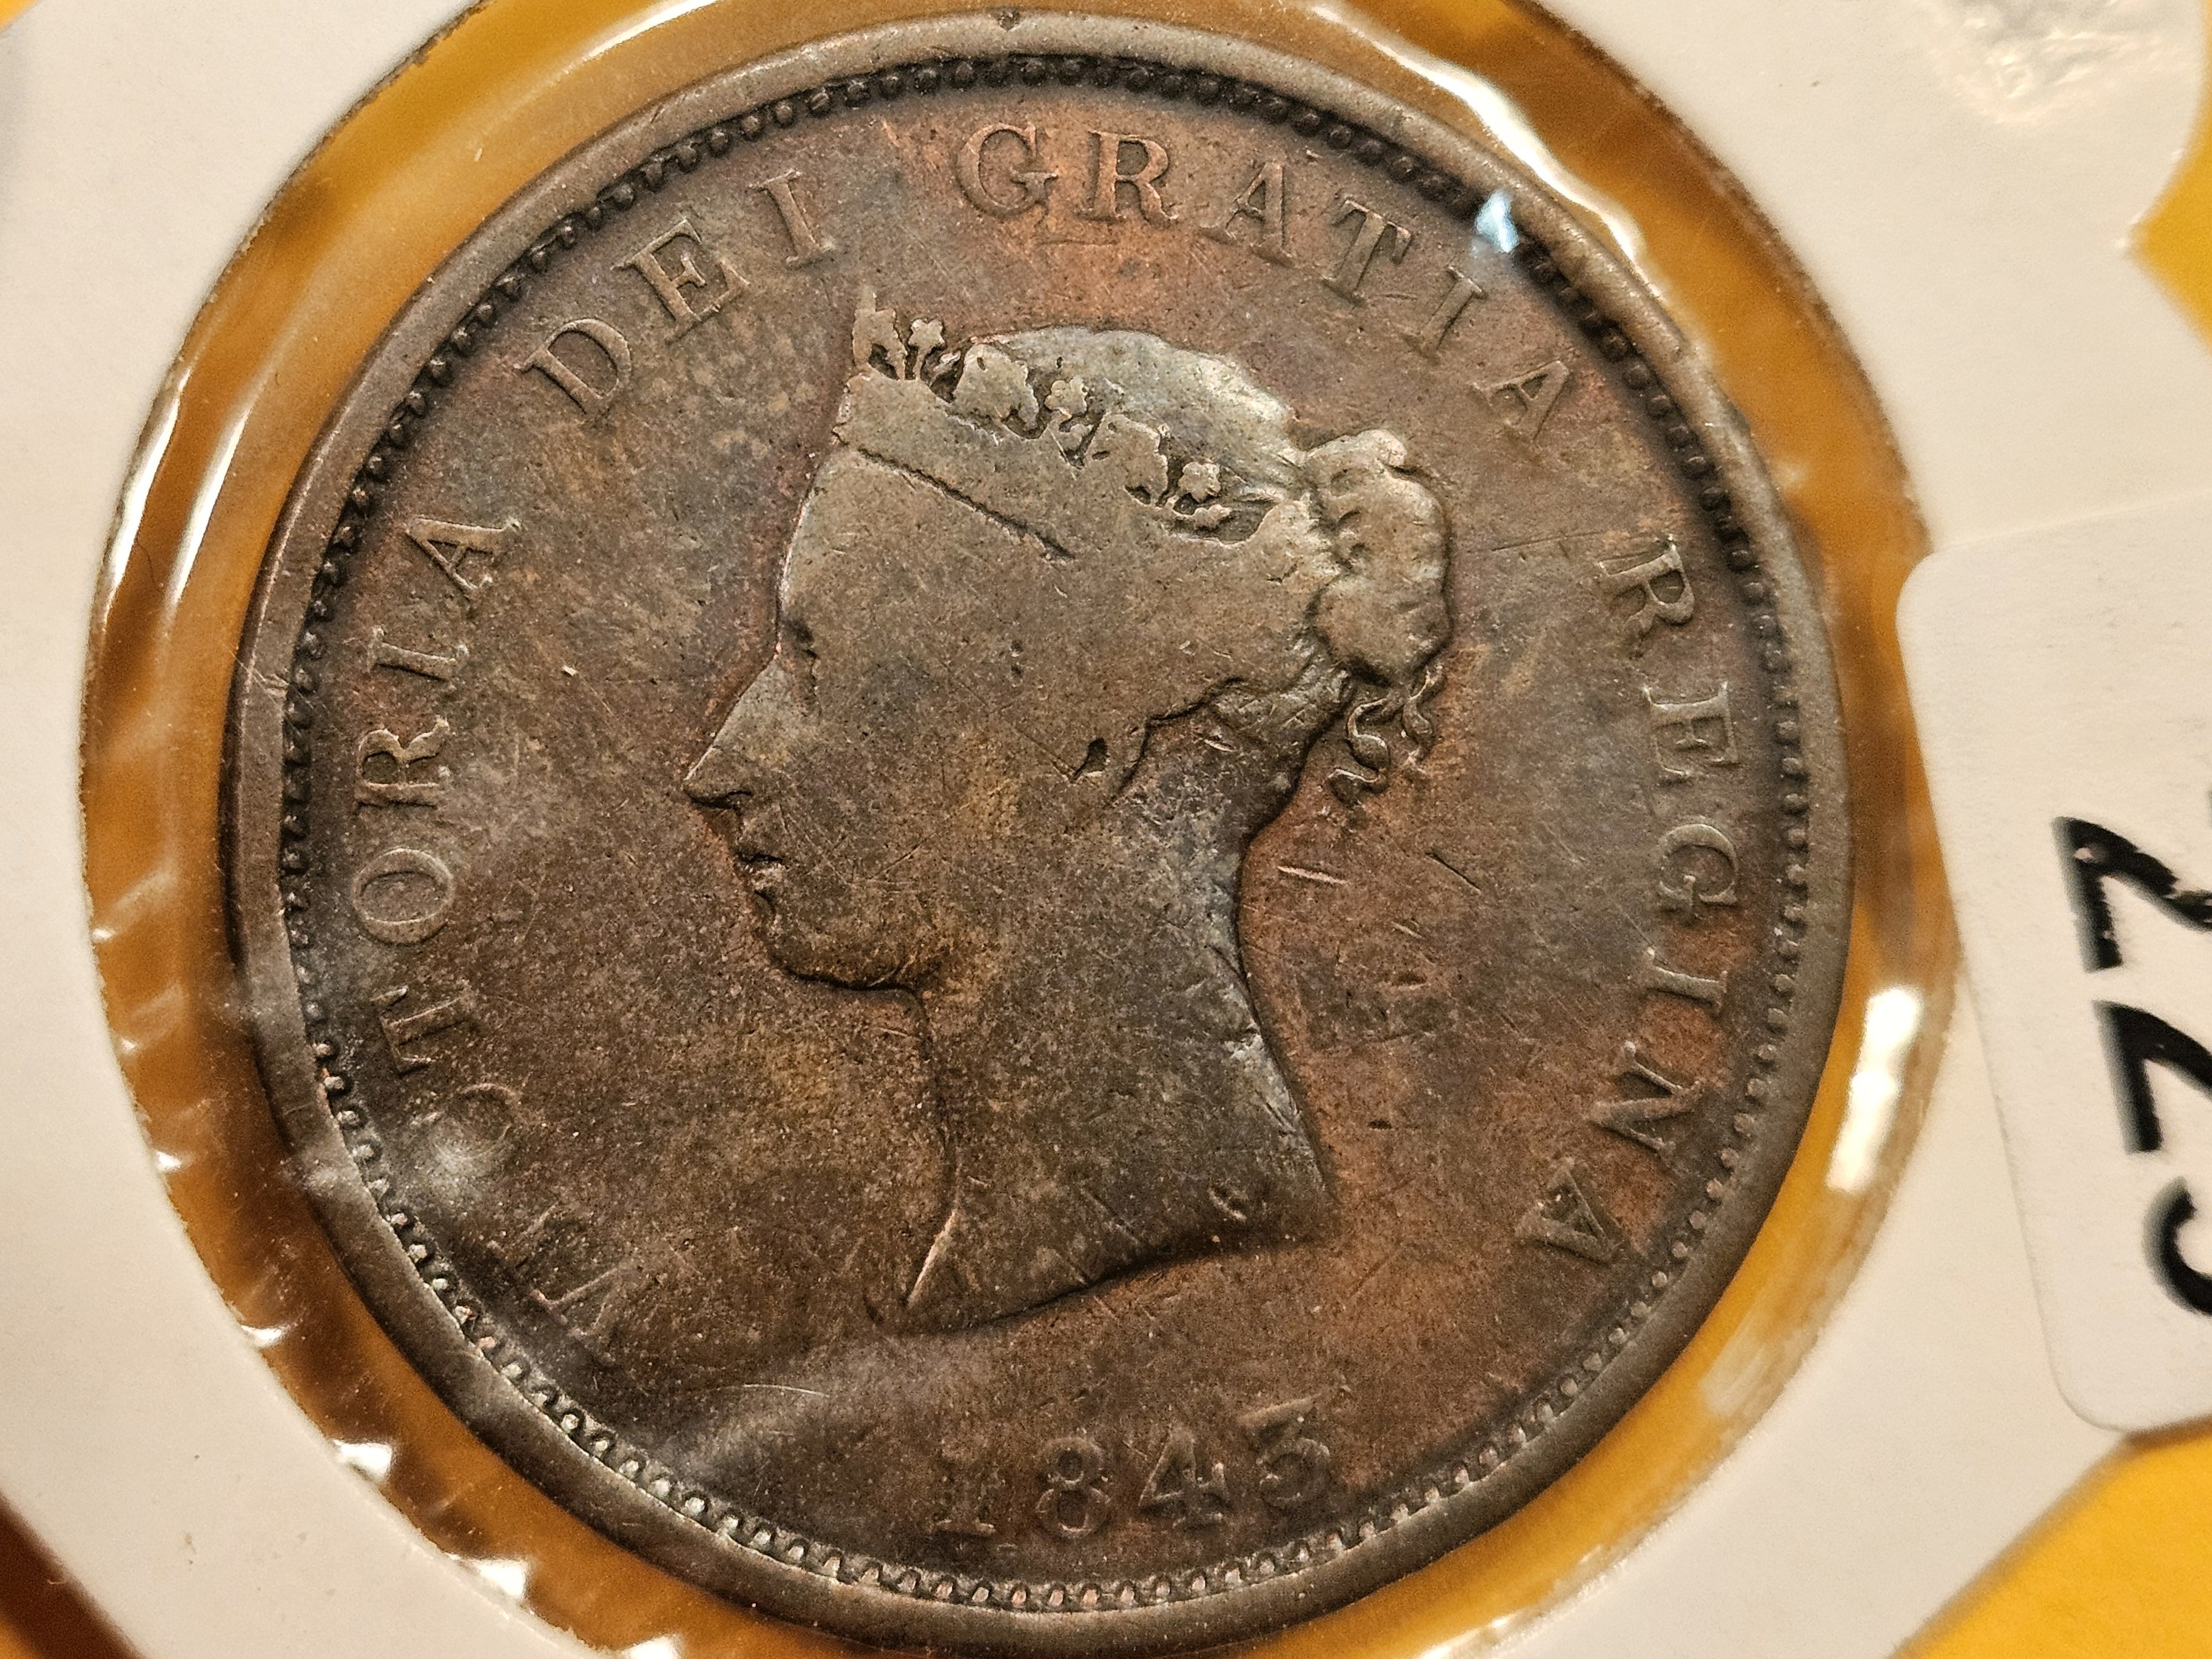 Bank of upper Canada one penny token : r/CanadianCoins